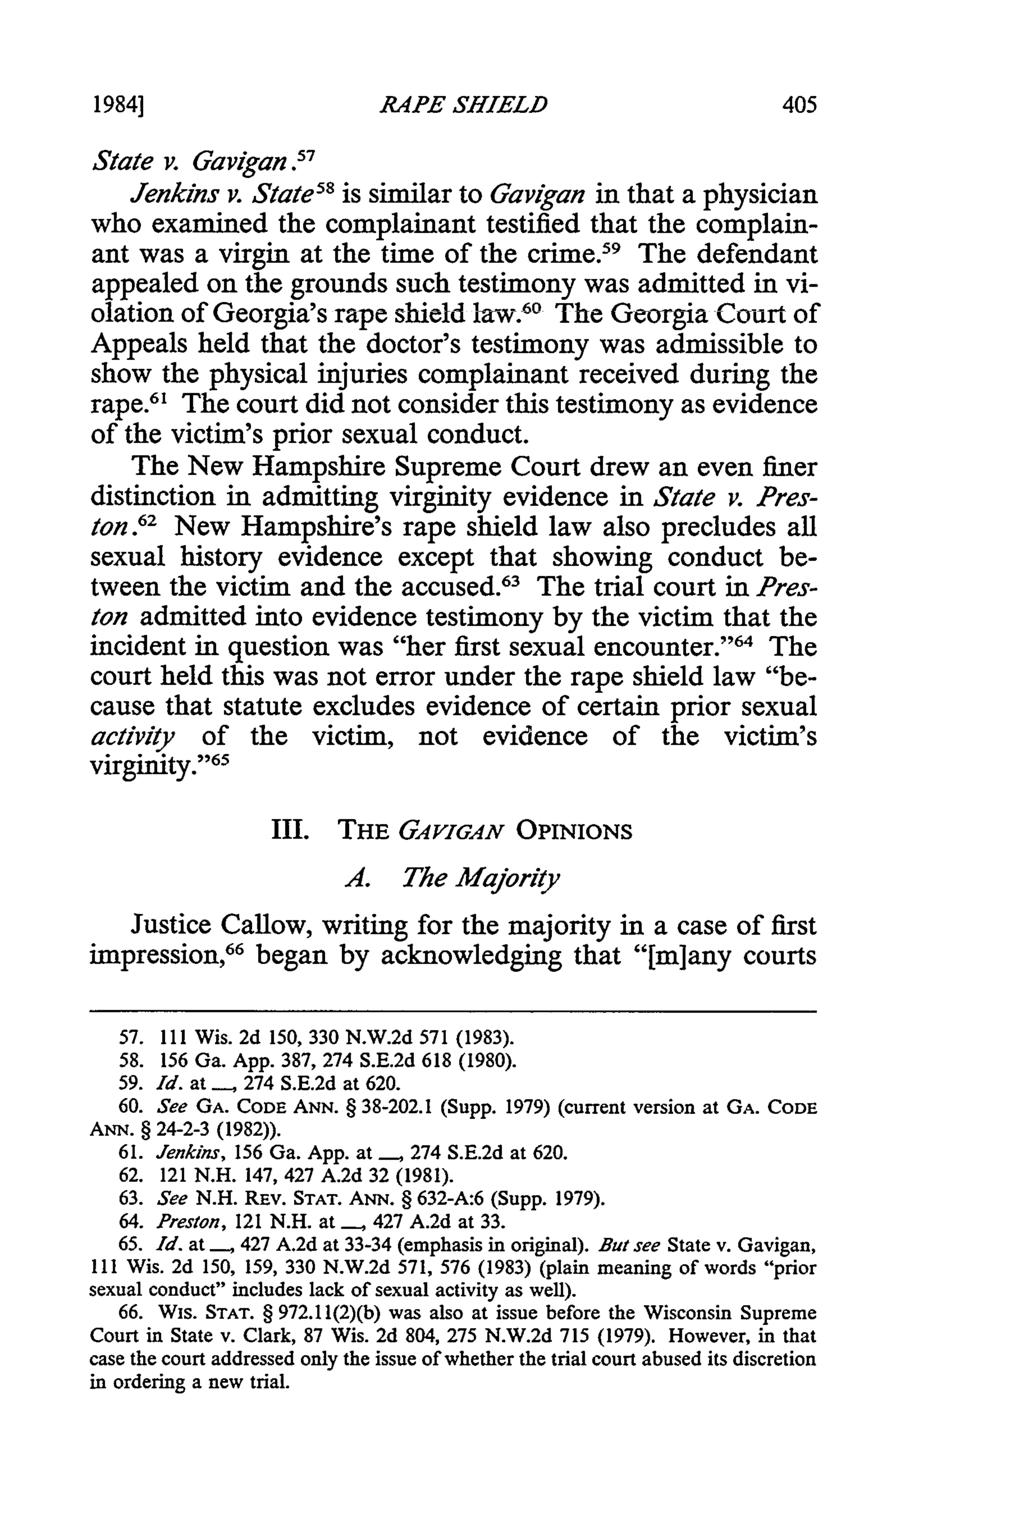 1984] RAPE SHIELD State v. Gavigan.: Jenkins v. State 58 is similar to Gavigan in that a physician who examined the complainant testified that the complainant was a virgin at the time of the crime.